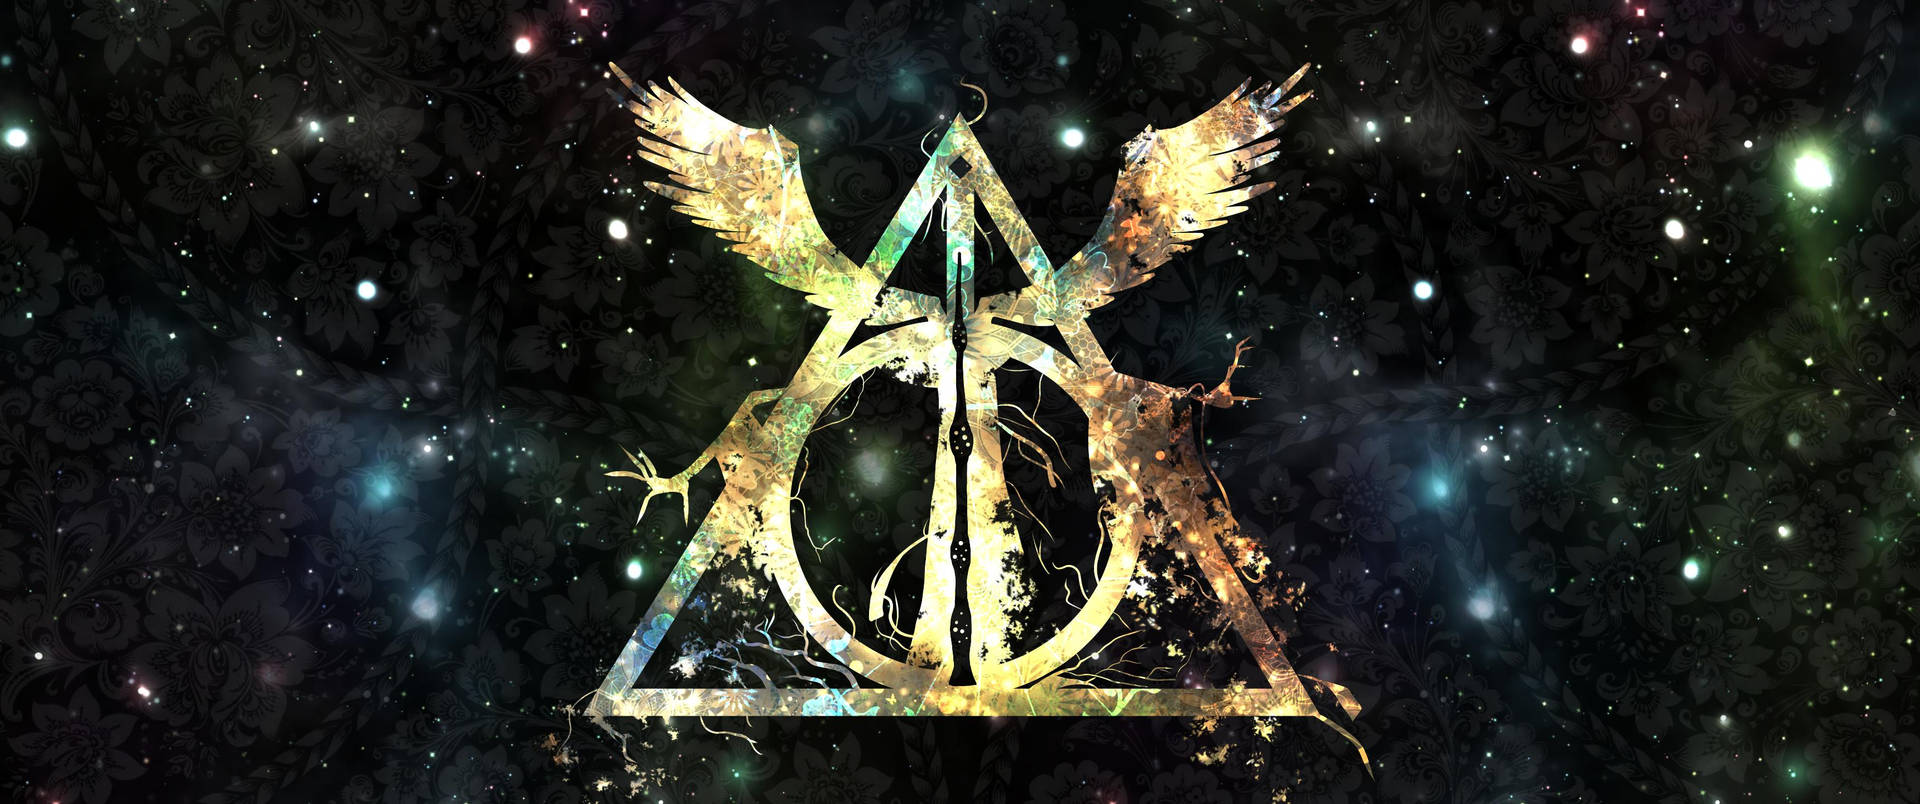 Download Harry Potter Deathly Hallows Wallpaper | Wallpapers.com